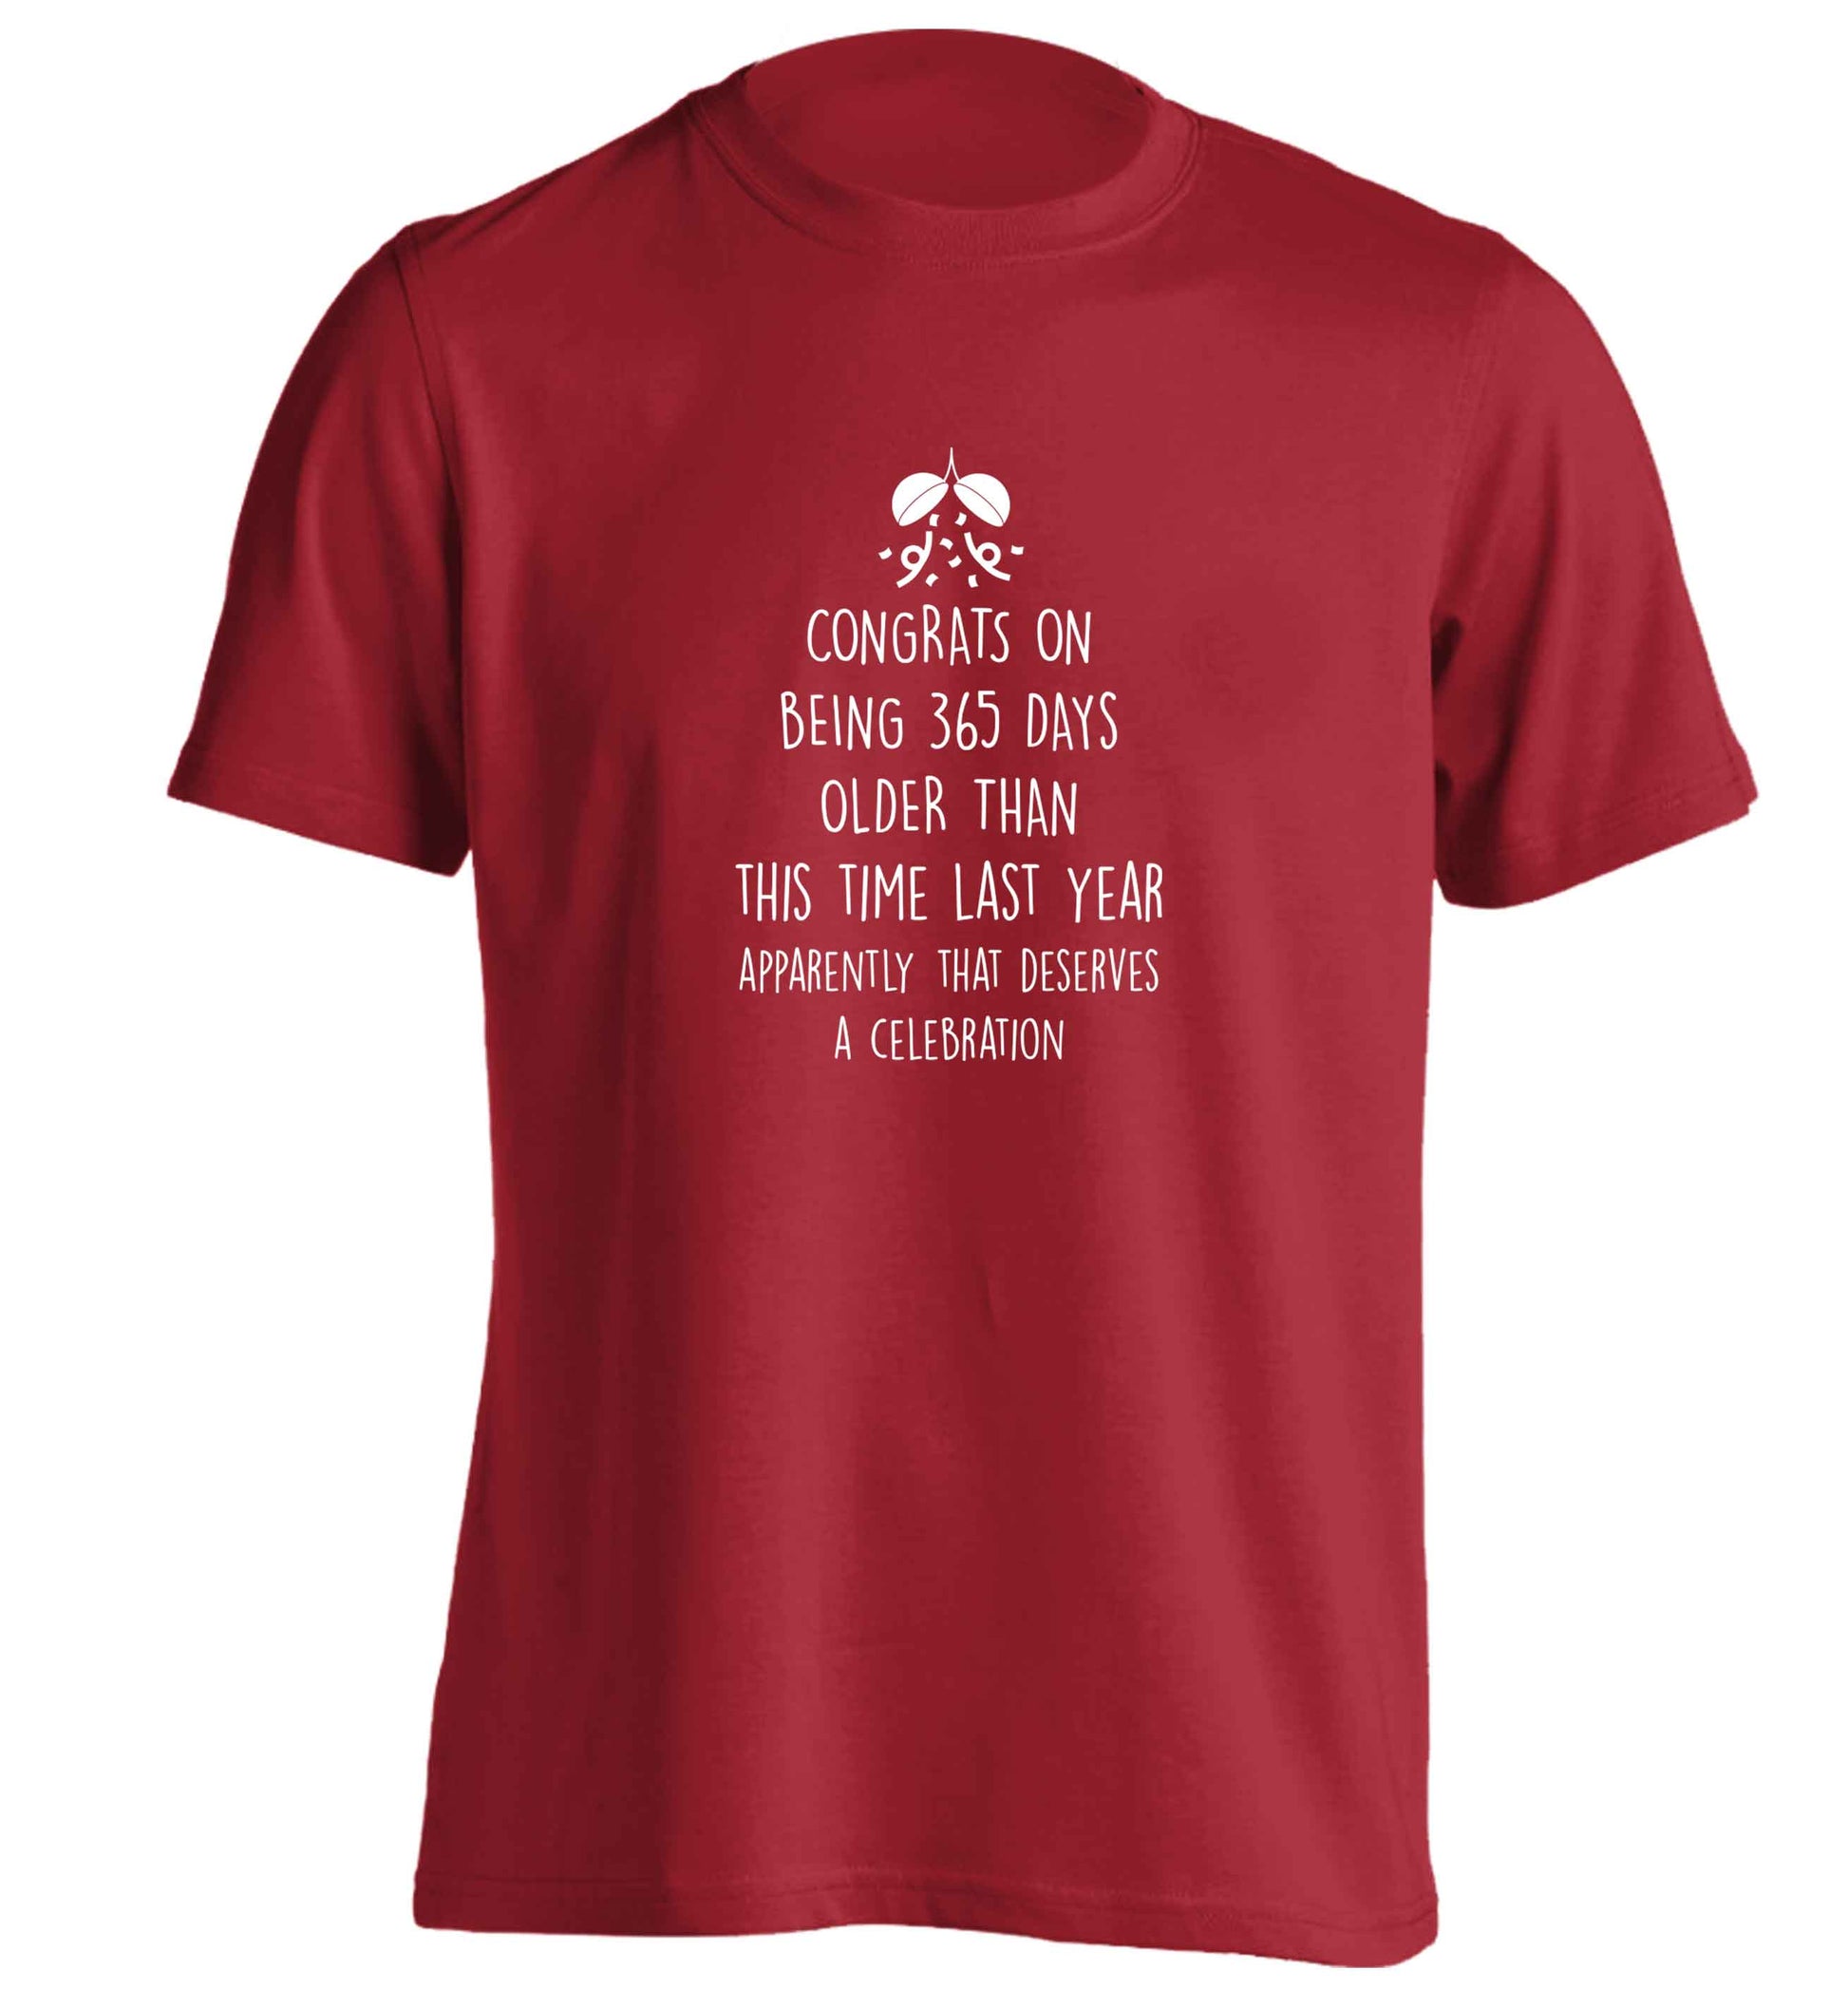 Congrats on being 365 days older than you were this time last year apparently that deserves a celebration adults unisex red Tshirt 2XL